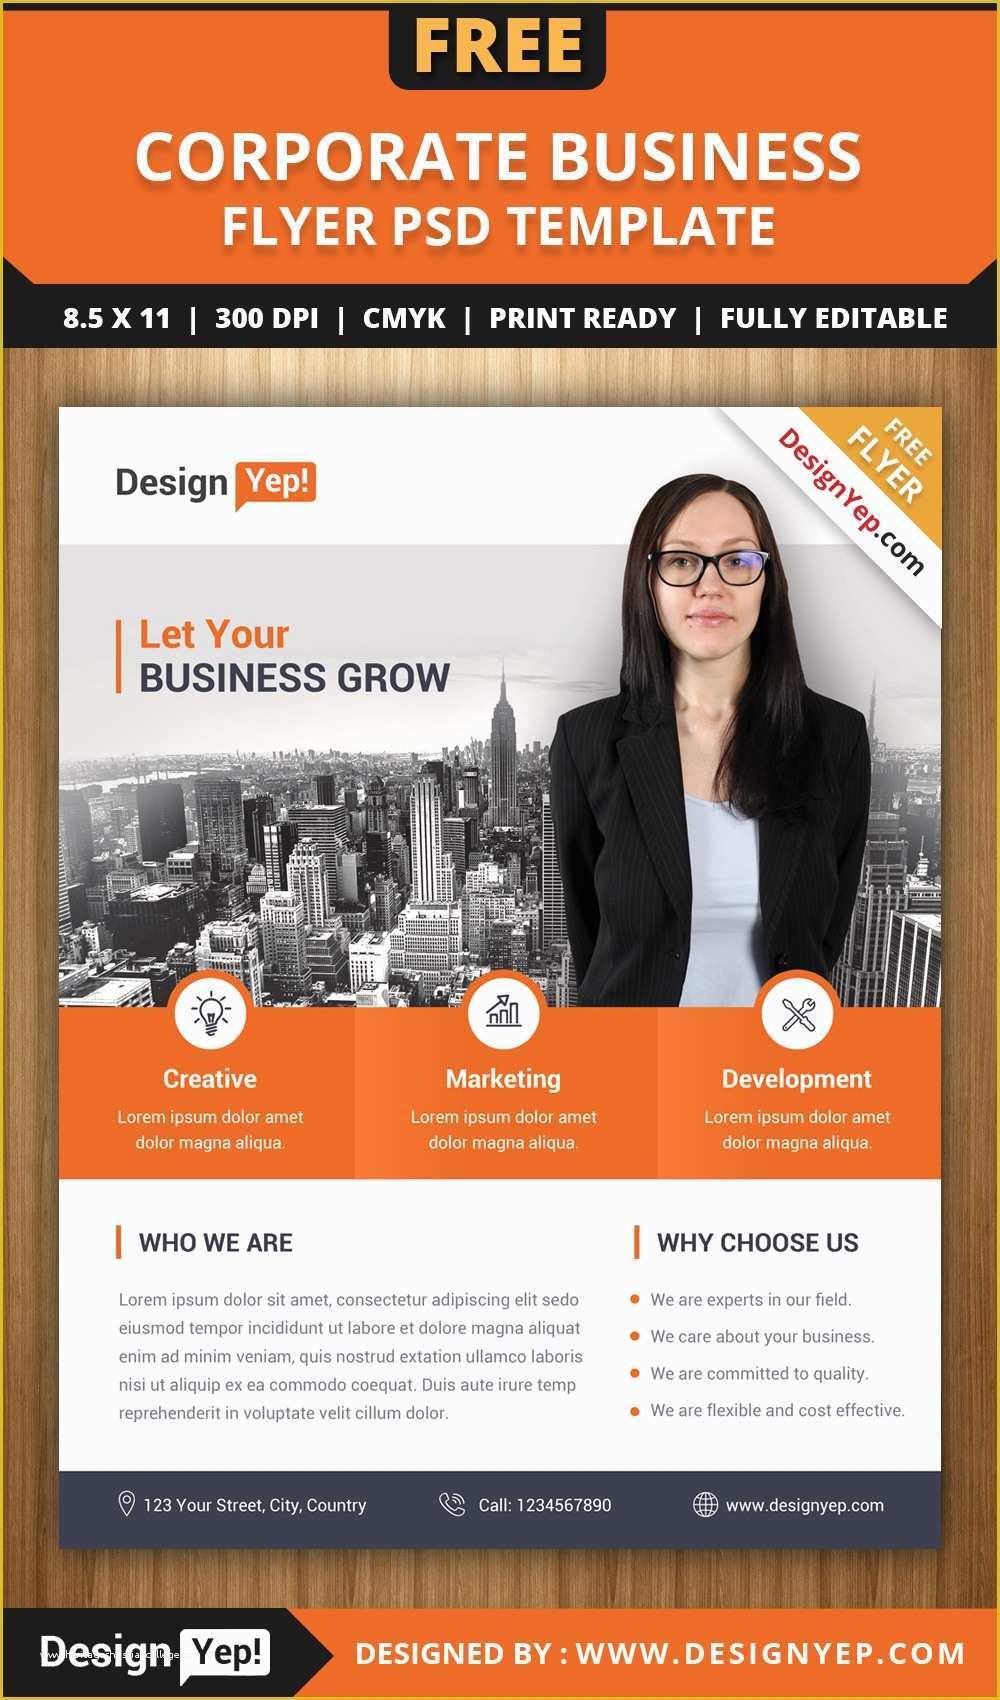 Free Business Flyer Templates Of Free Corporate Business Flyer Psd Template Designyep